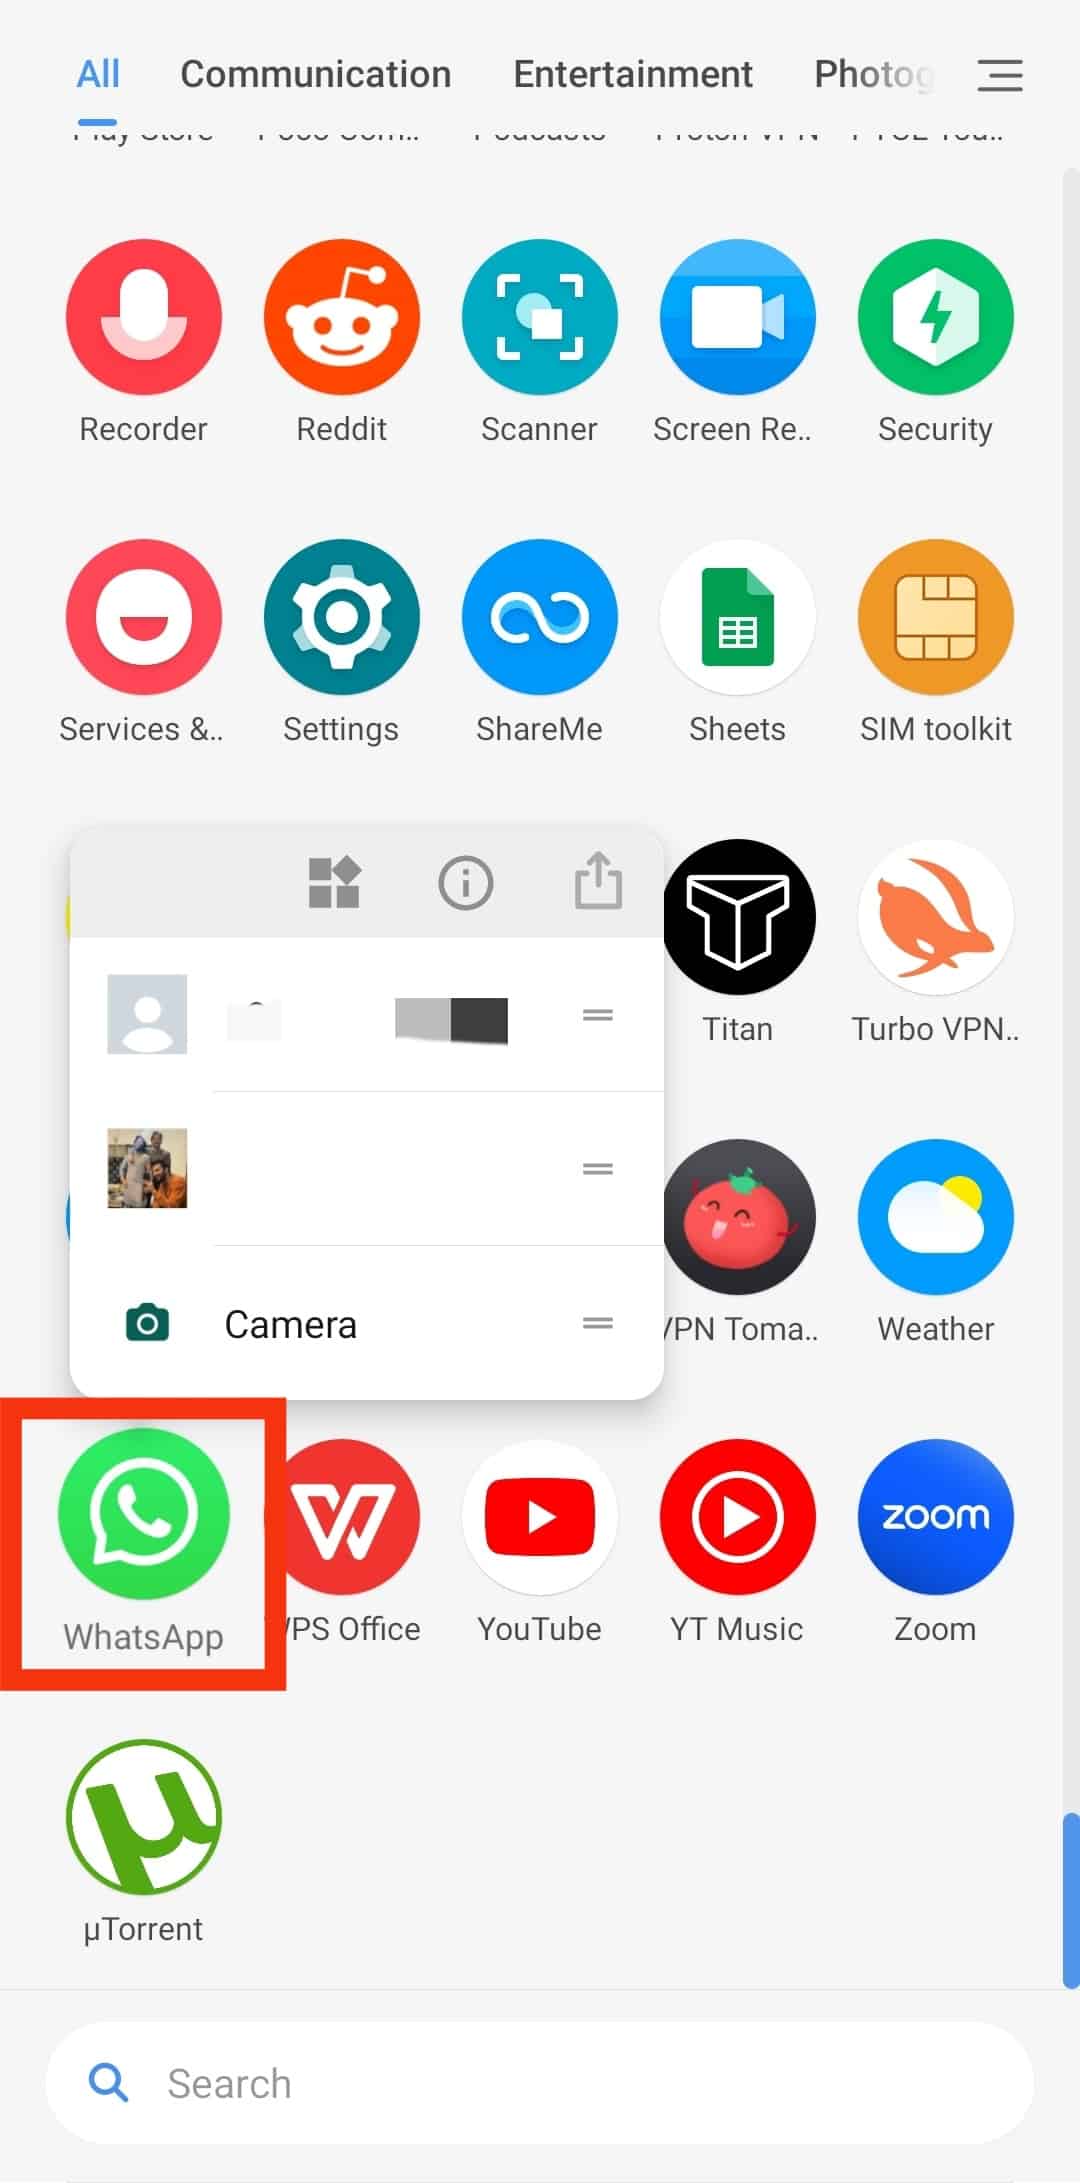 Press And Hold The Whatsapp App Icon